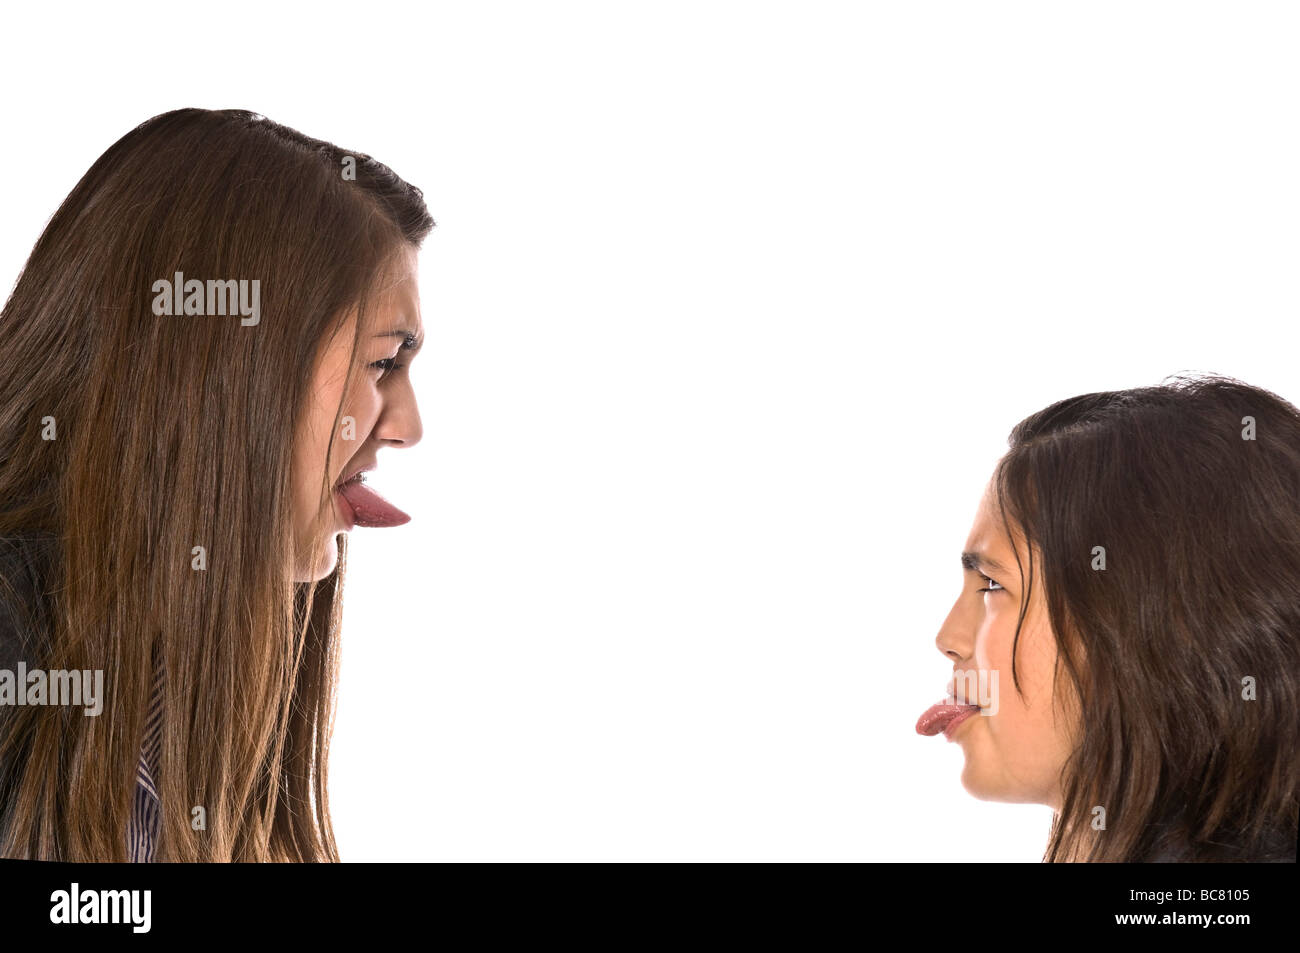 Horizontal close up portrait of angry teenage school girls poking their tongues out during a fight against a white background Stock Photo